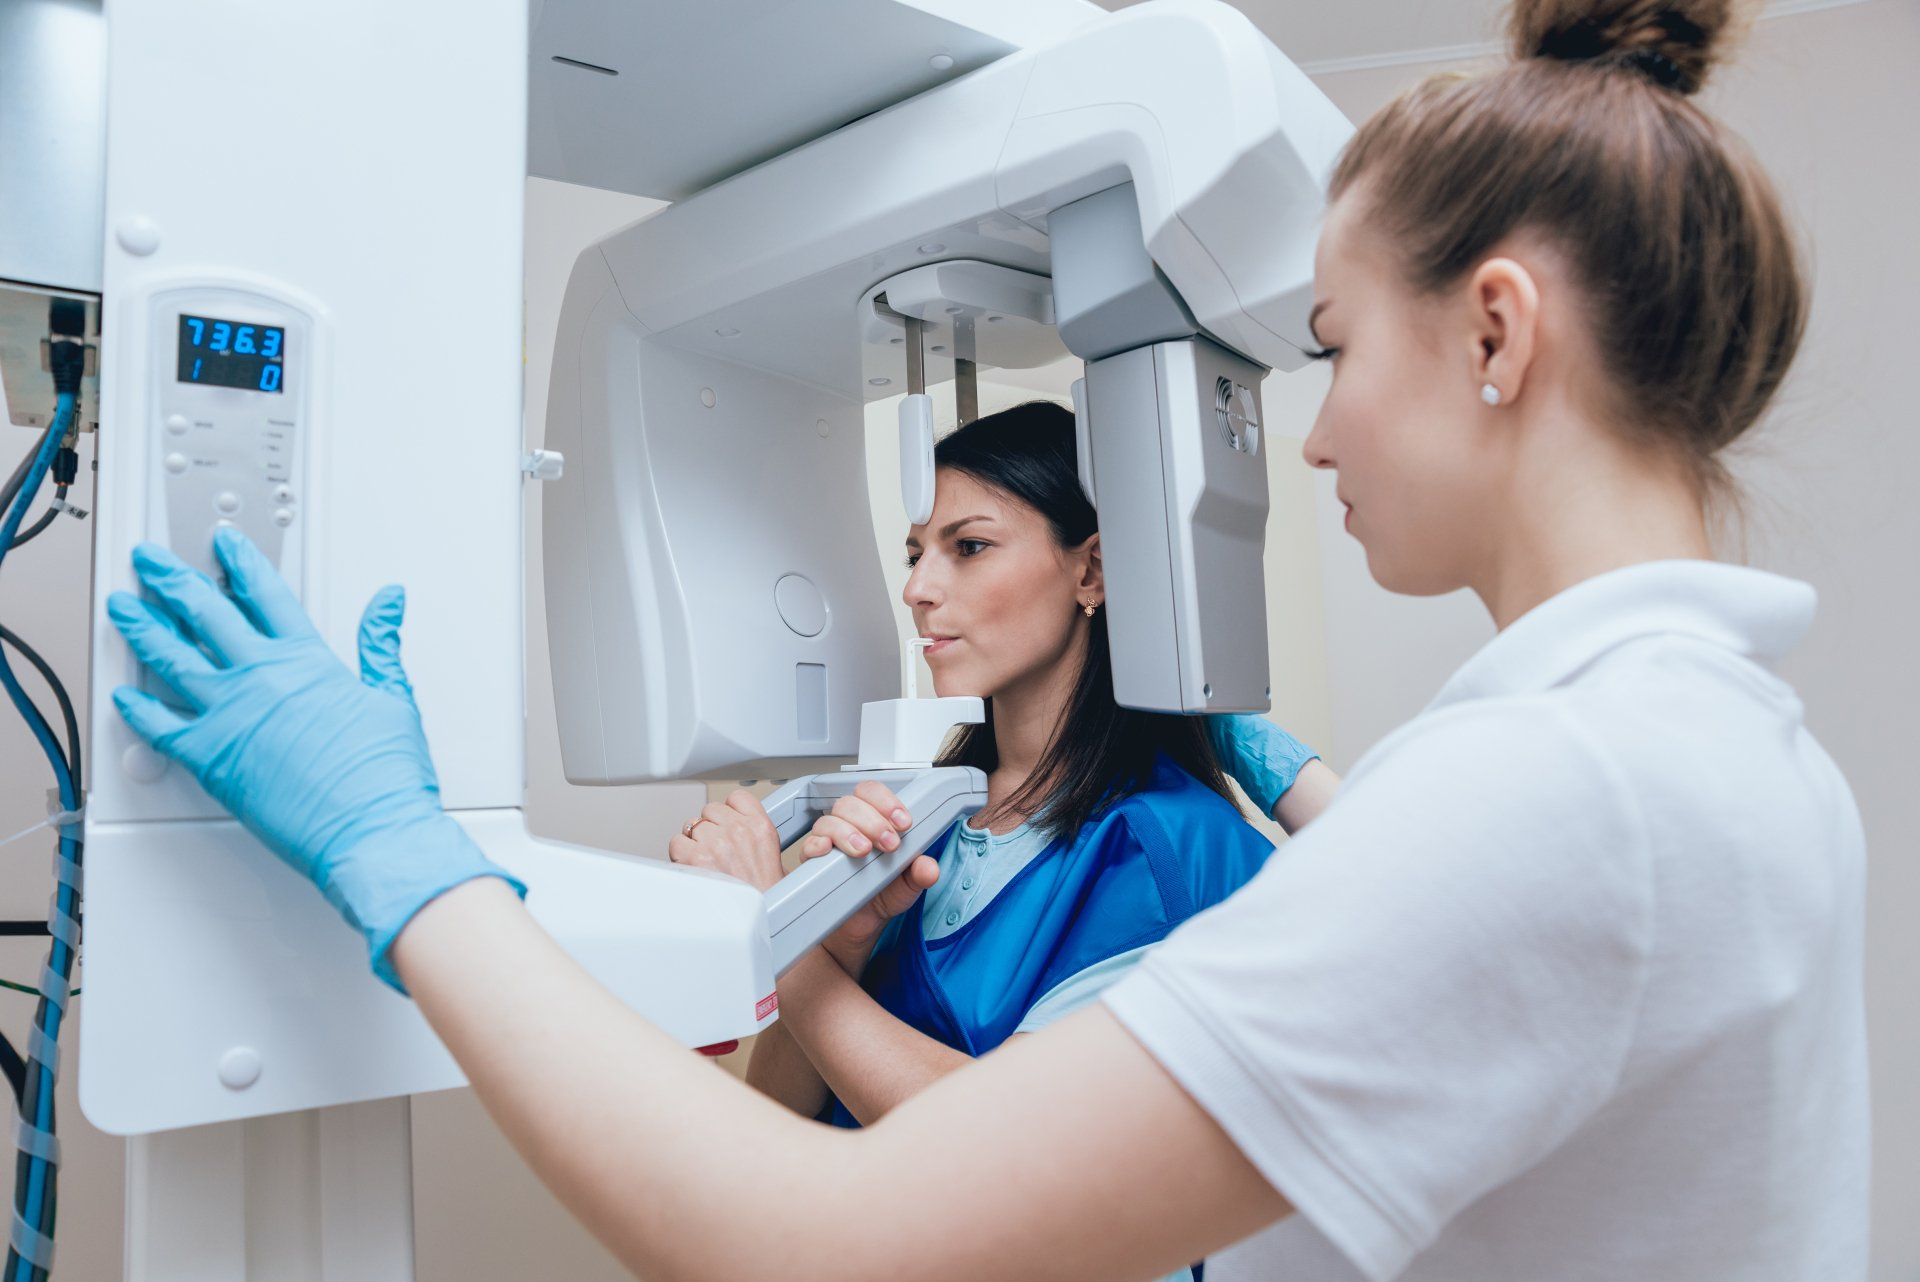 Dental technology | x ray machine | Pediatric dentist near you | female patient getting an x ray | Photos Of Our Office | Durham Kids Dentistry | Pediatric Dentist In Whitby